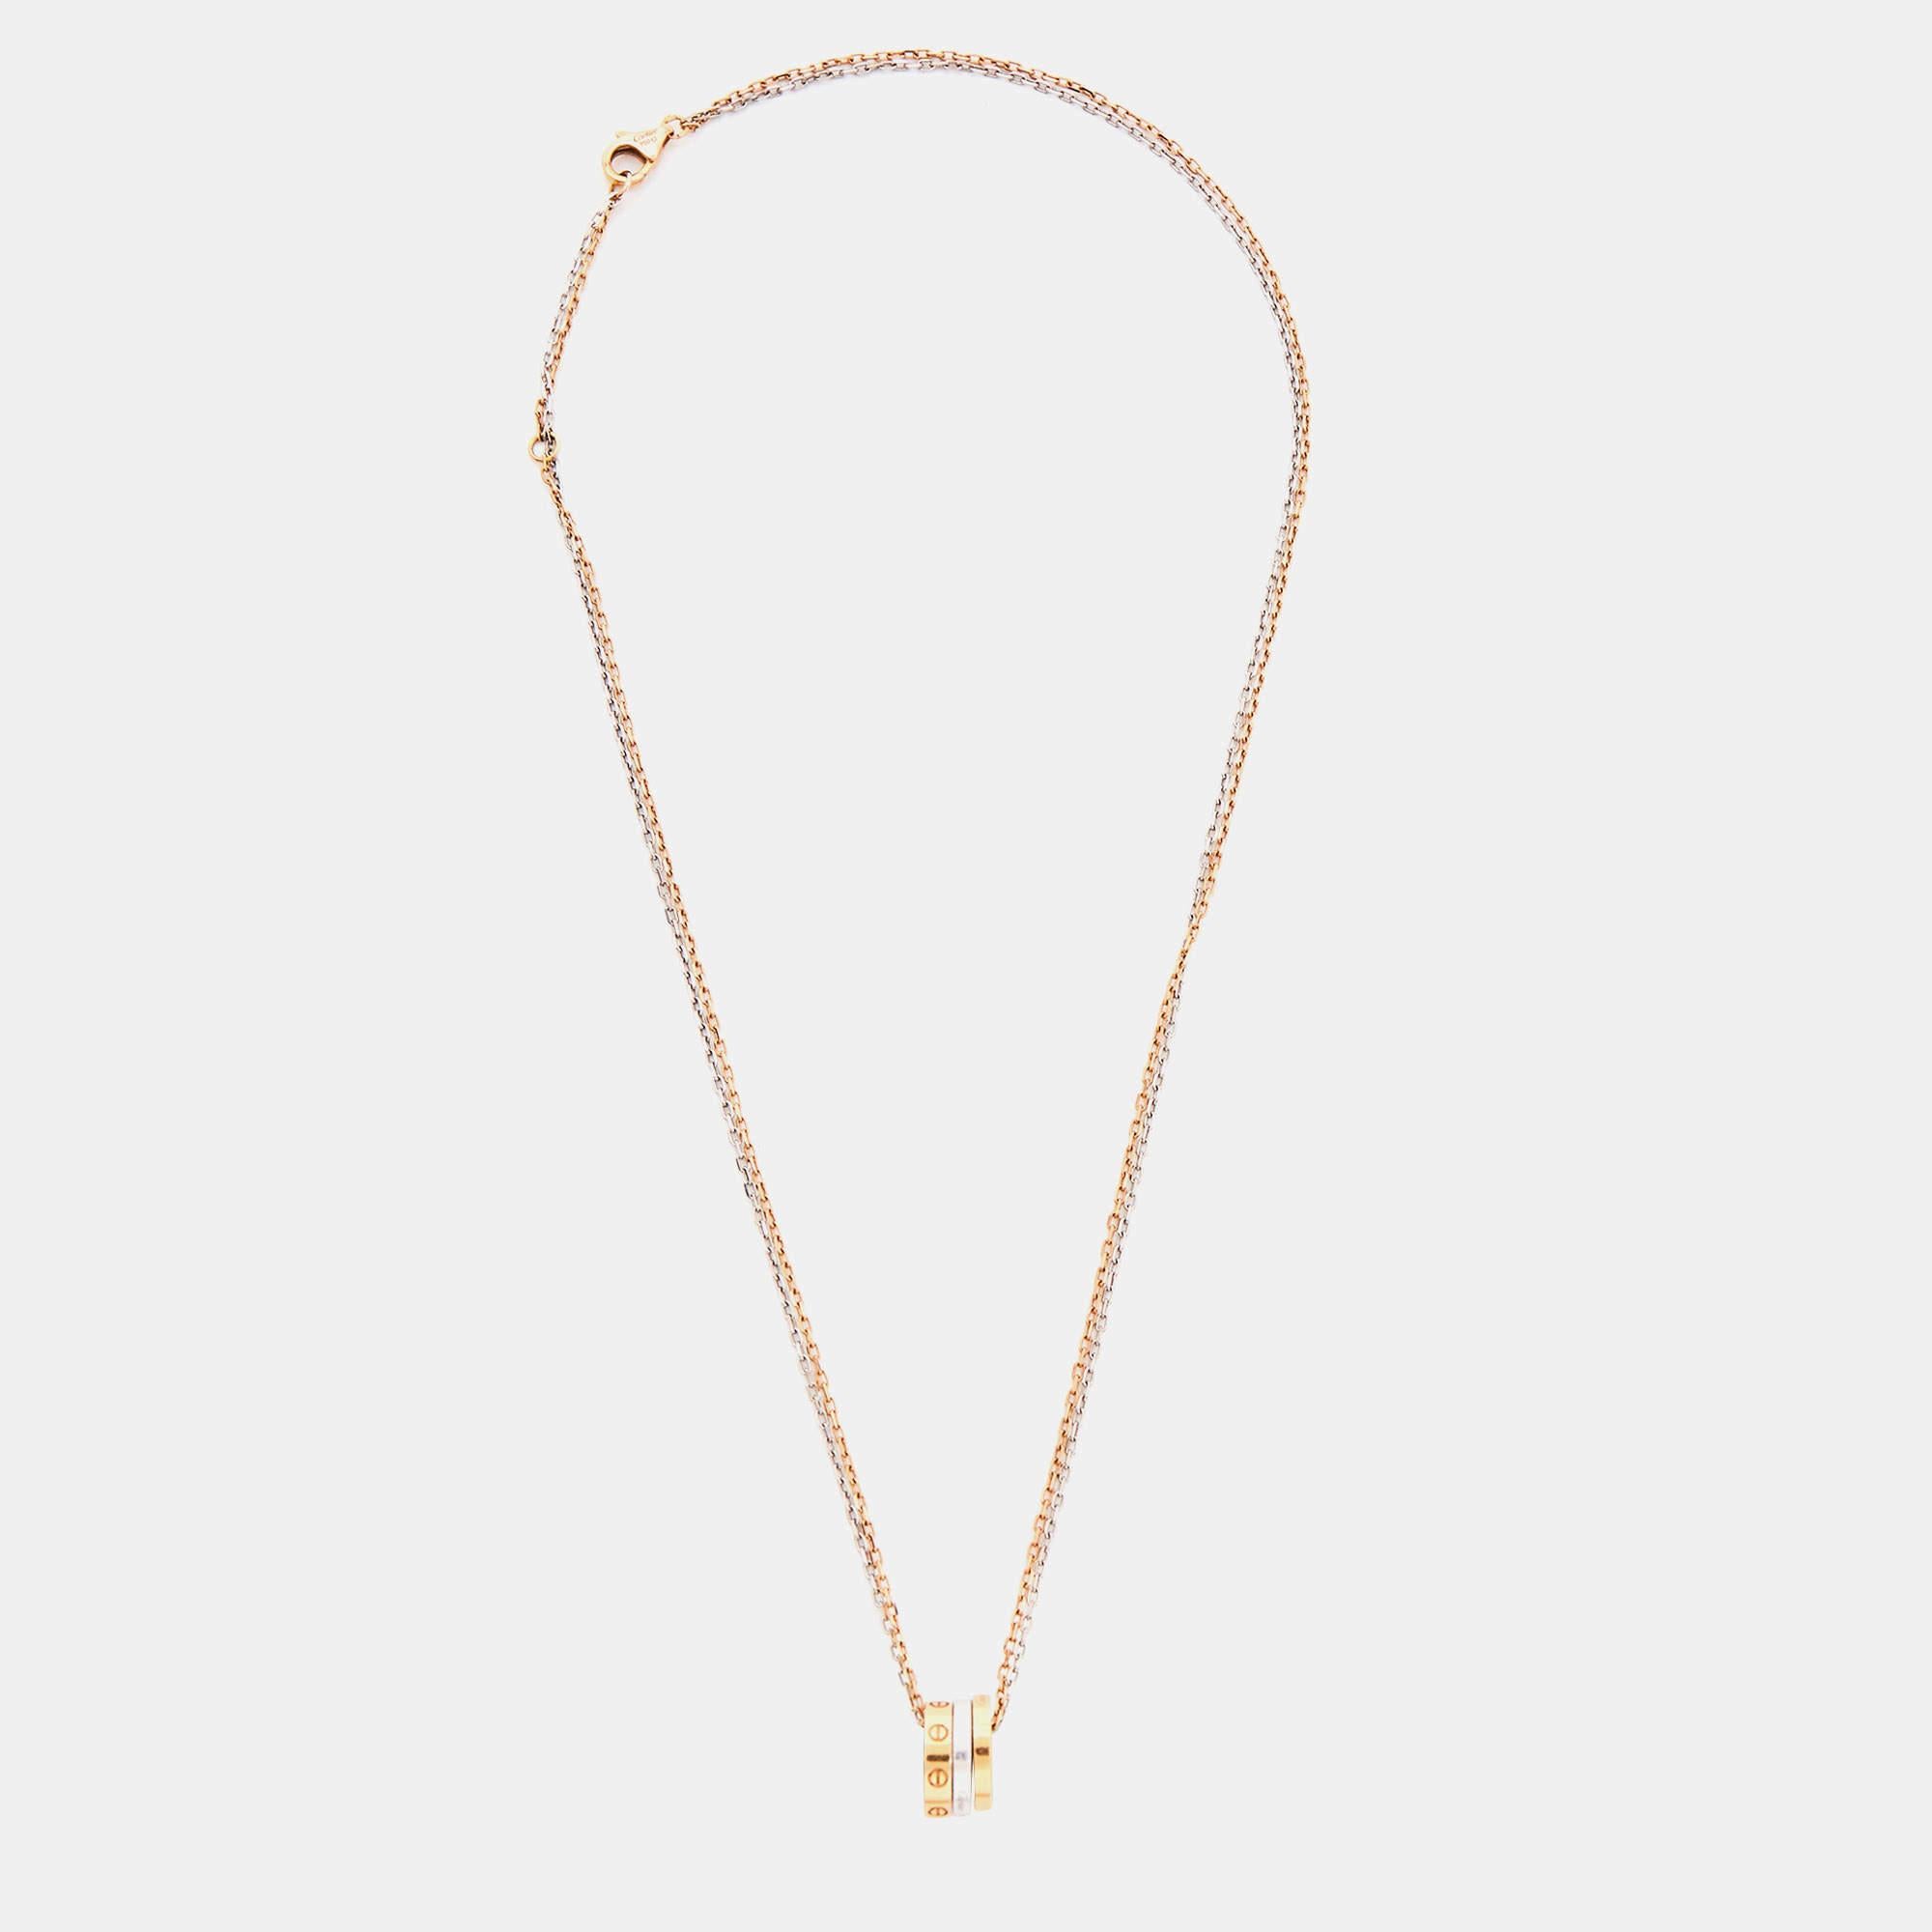 The Cartier Love necklace is a luxurious and elegant piece of jewelry. Made from 18k gold, it features a double-chain design that adds a modern touch. The necklace is adorned with sparkling diamonds, adding a dazzling and glamorous element. It is a